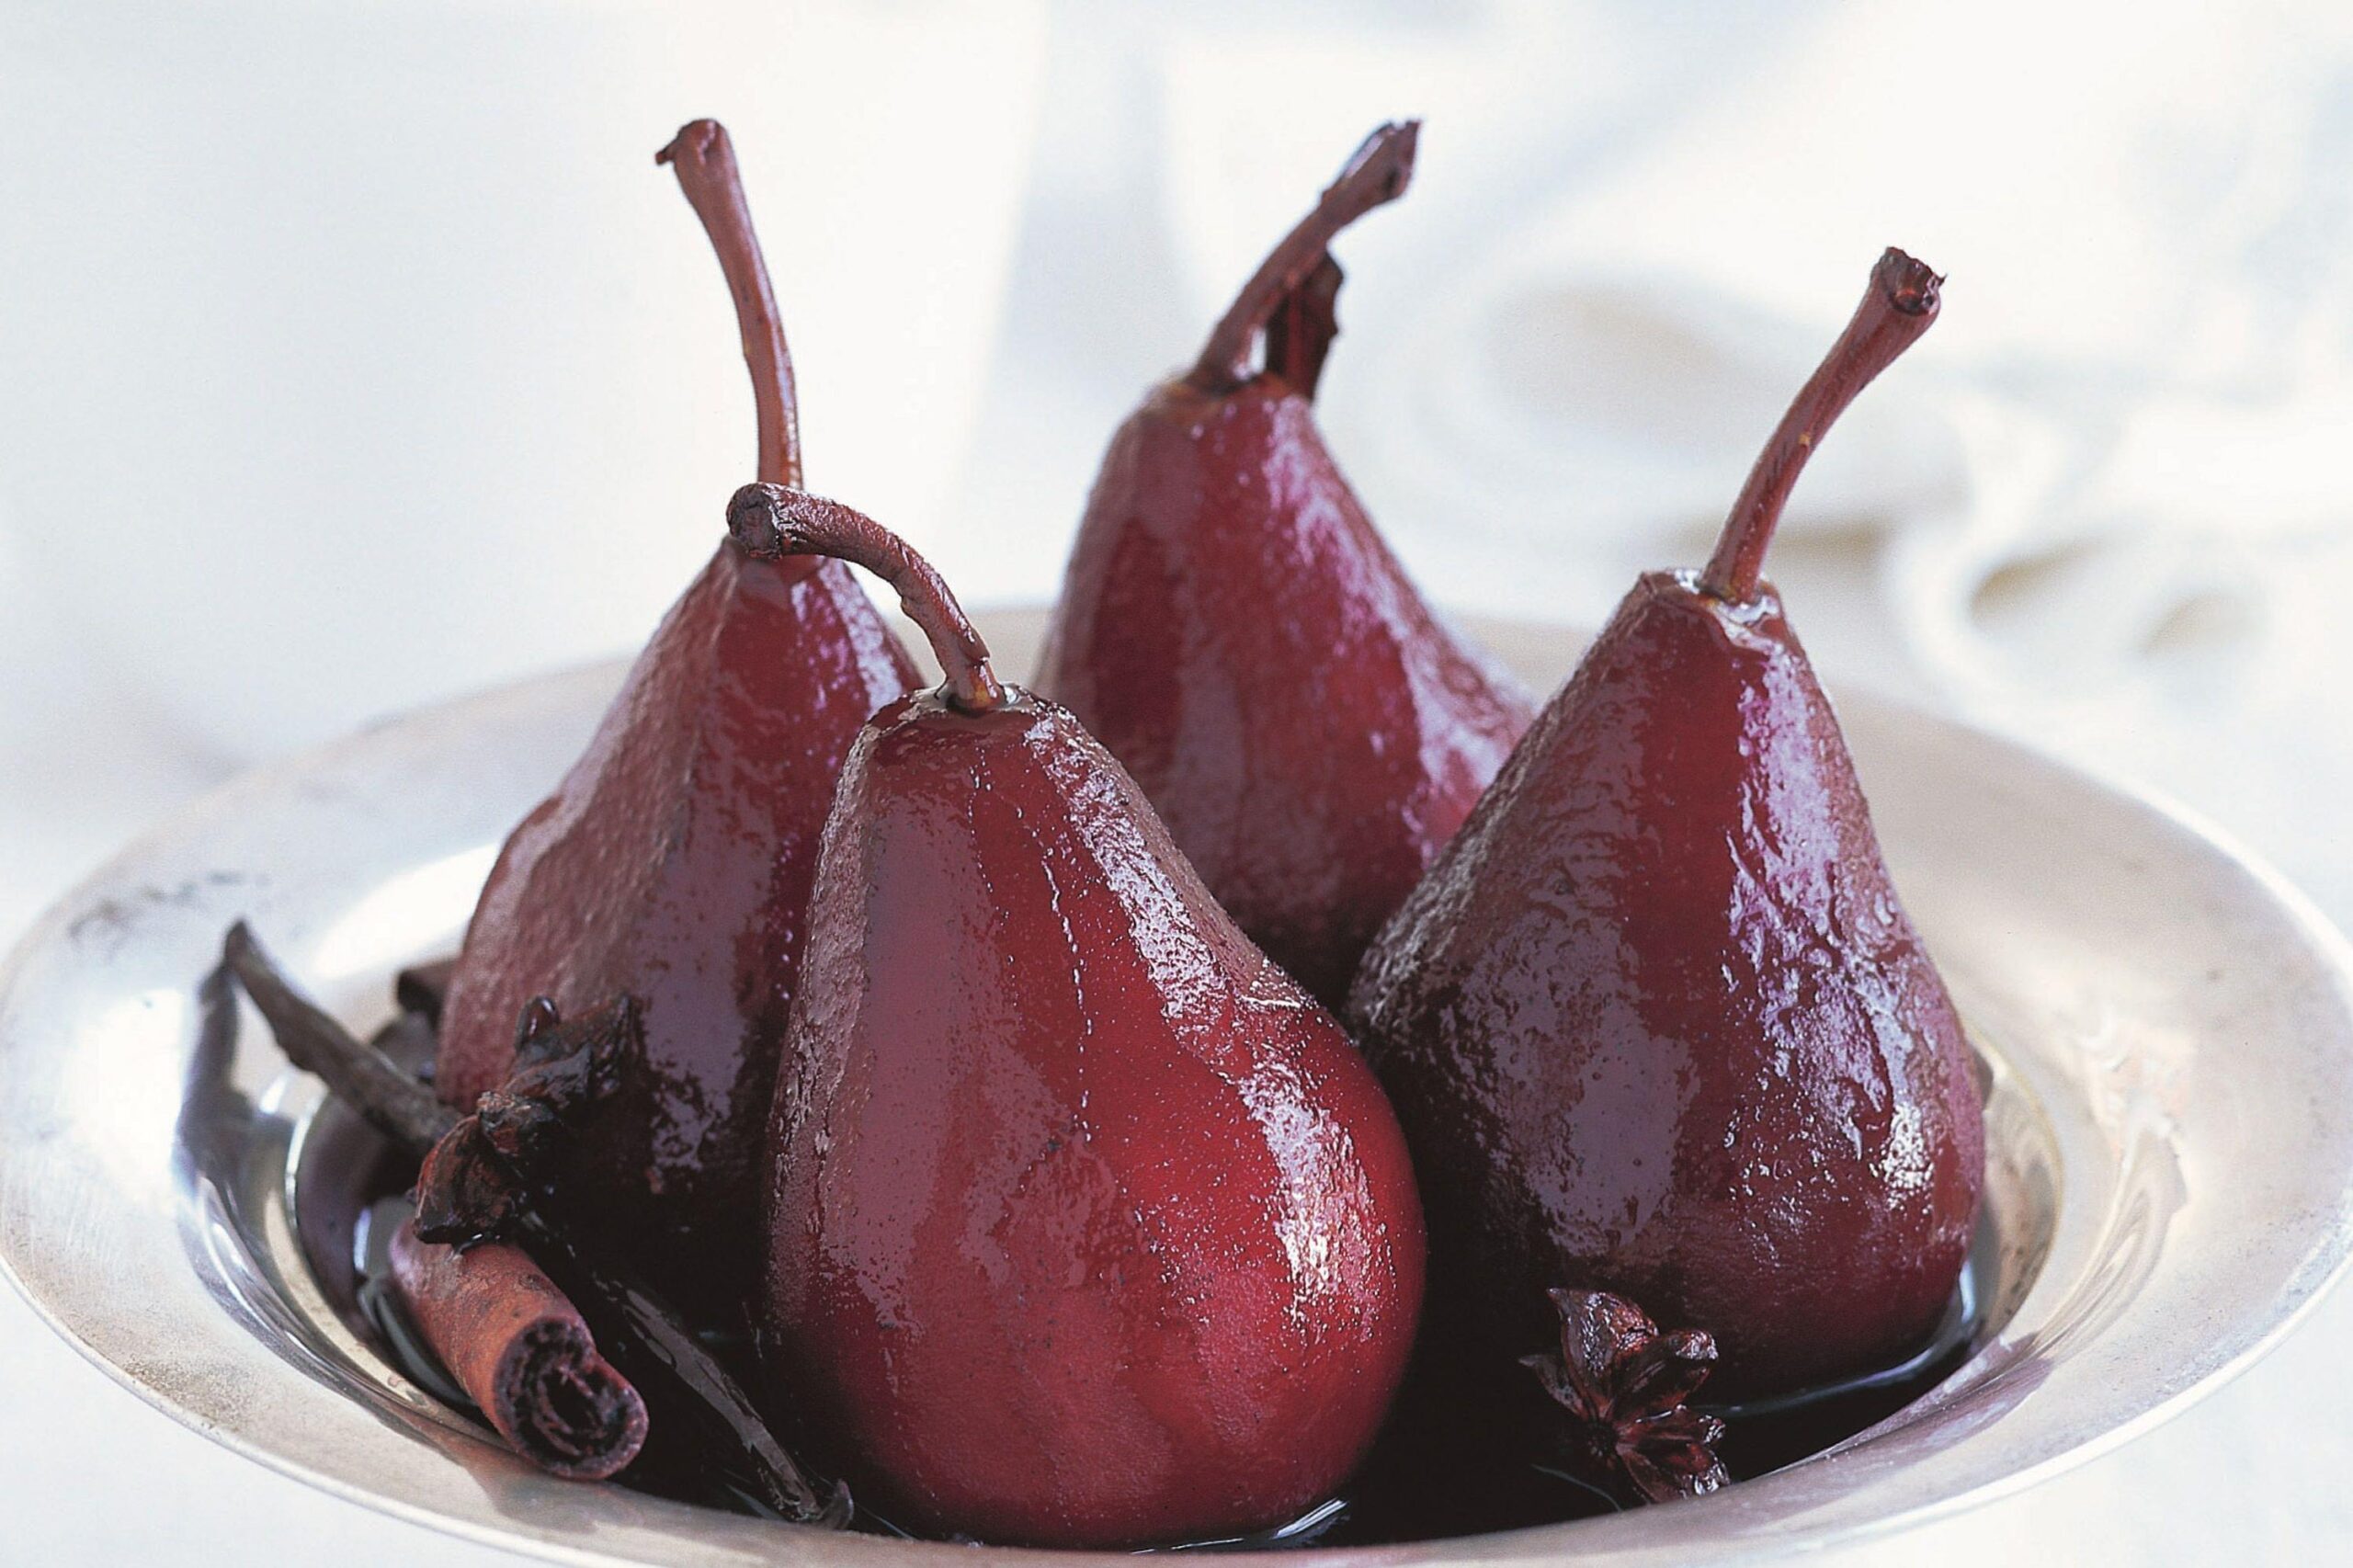  Pears poached in wine? A match made in heaven.